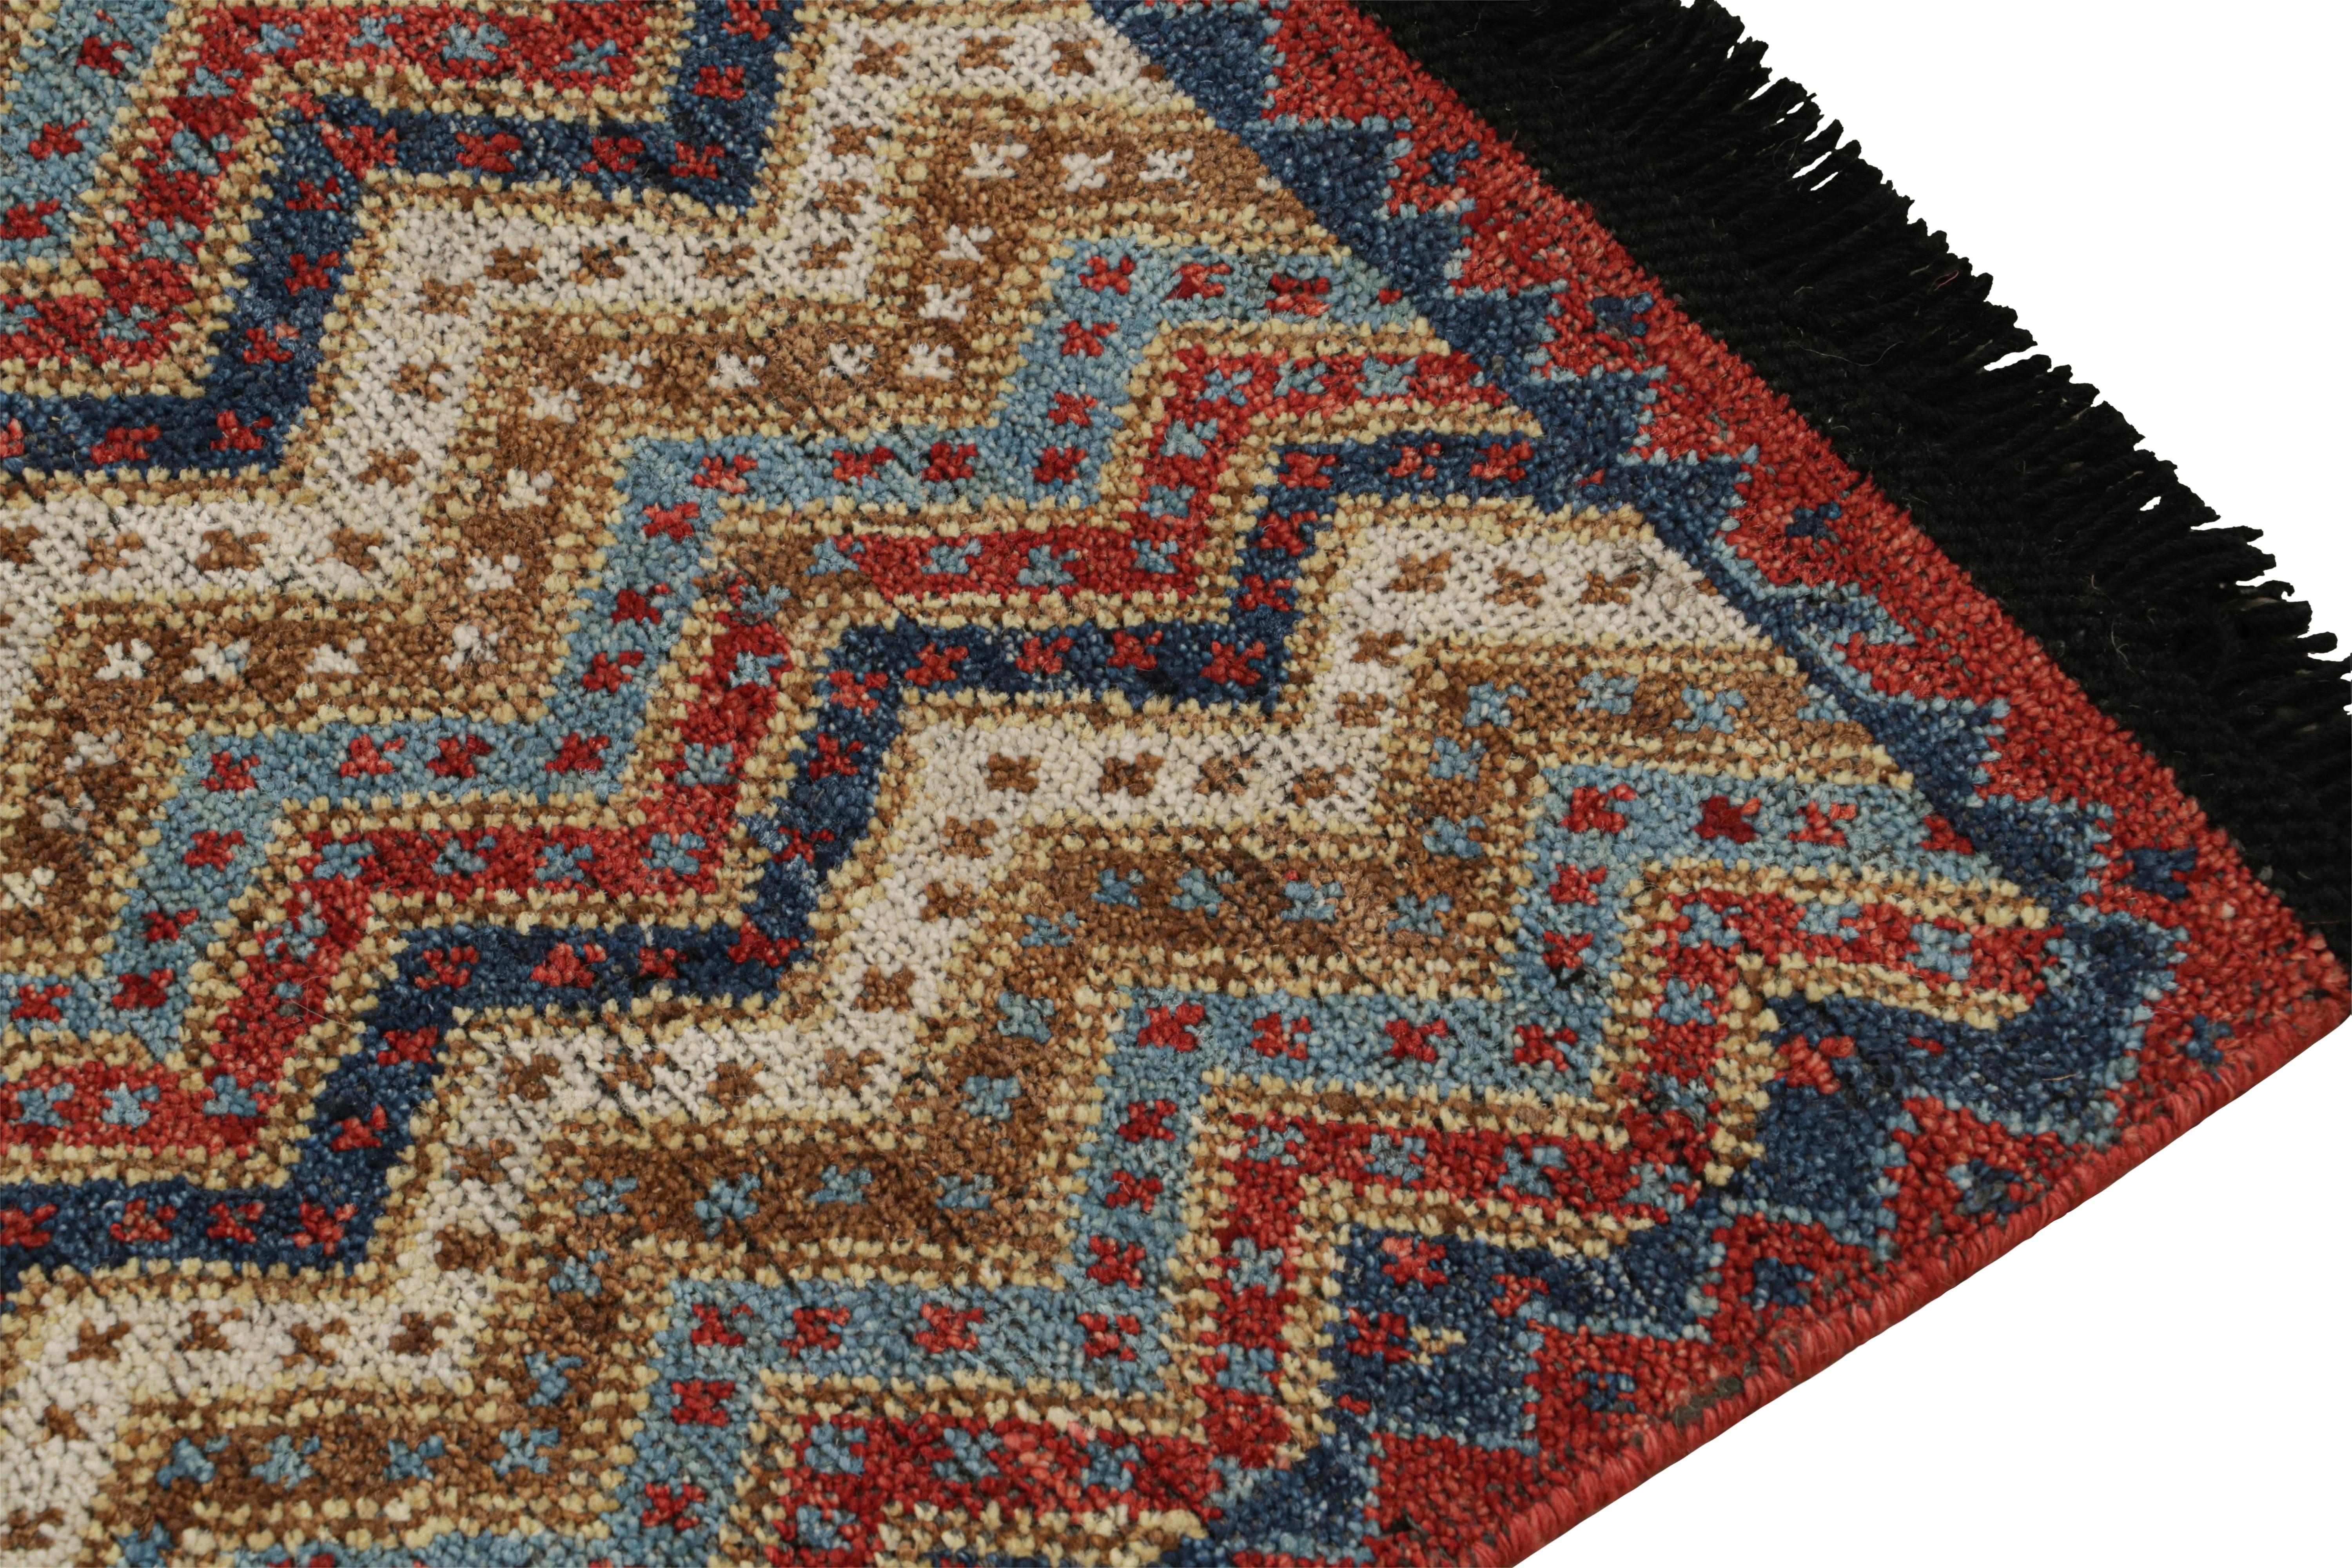 This gift-sized 2x3 rug is a new addition to the custom classics Burano Collection by Rug & Kilim. Hand-knotted in wool, this line explores the most iconic antique rug styles in history with a smart contemporary approach. 

On the Design: 

This